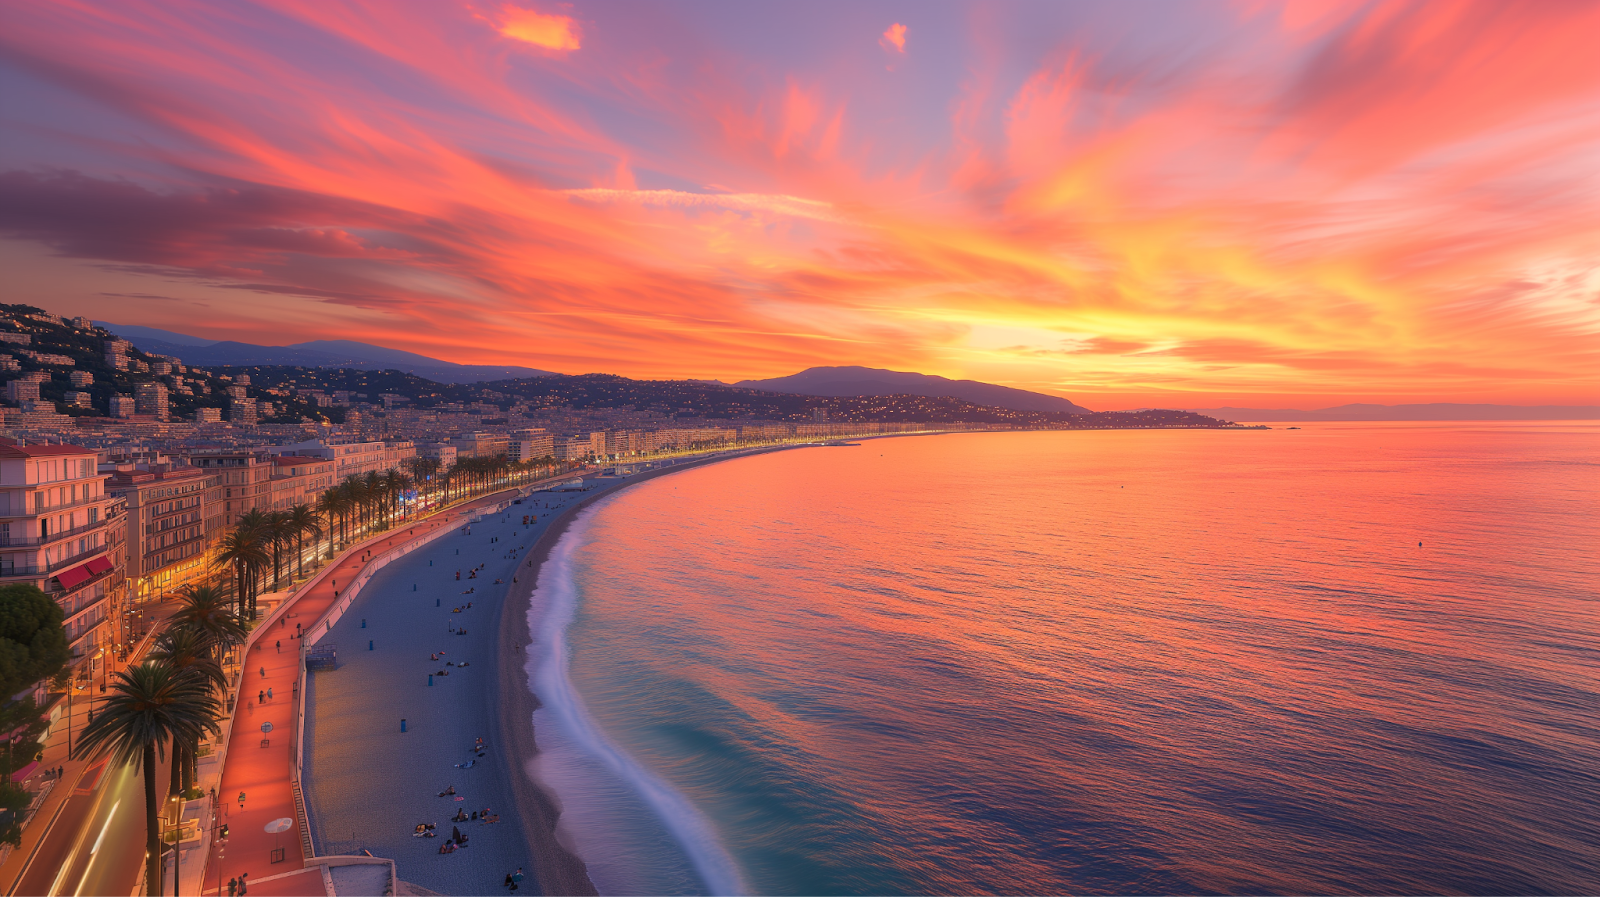 A panoramic view of Nice's Promenade des Anglais at sunset.